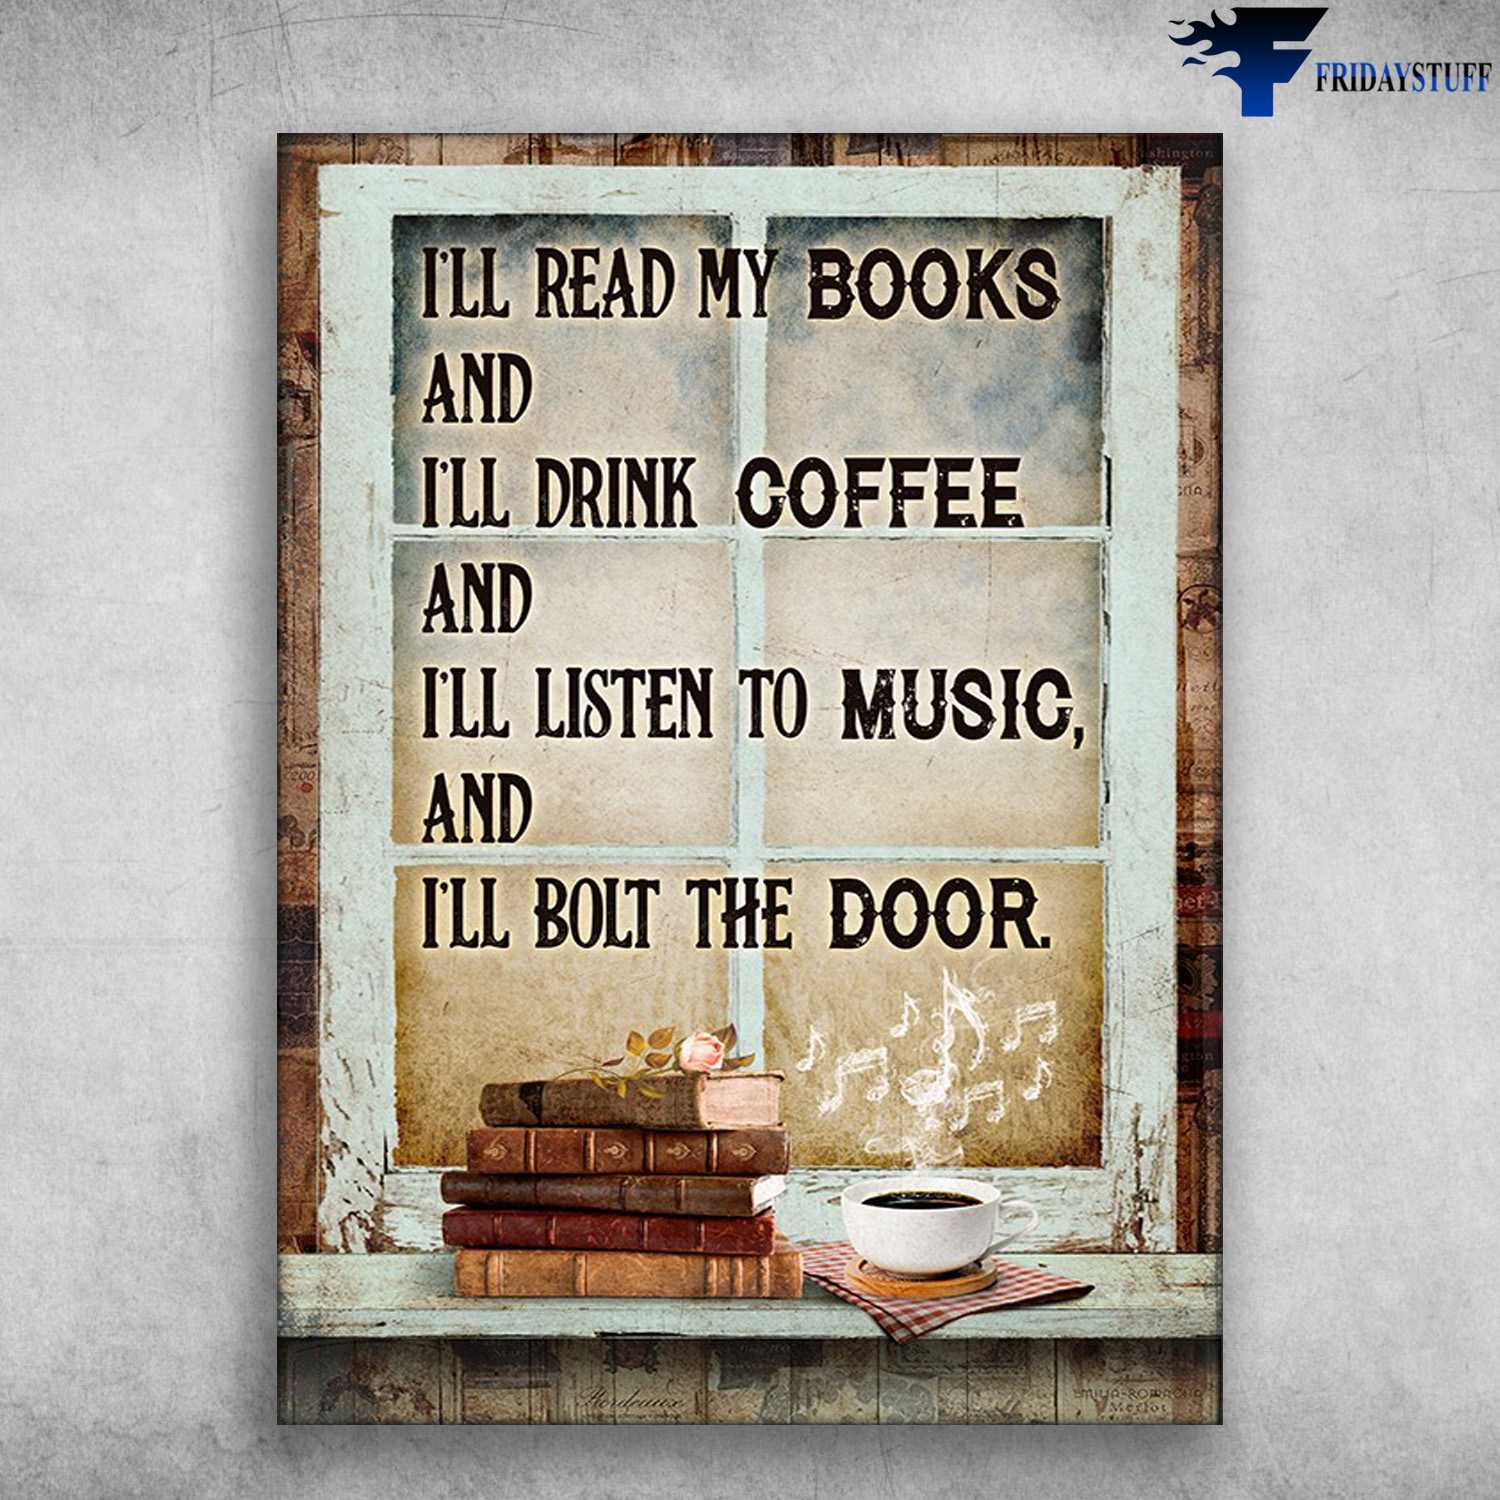 Book And Coffee, Book Lover - I'll Read My Book, And I'll Drink Coffee, And I'll Listen To Music, And I'll Bolt The Door